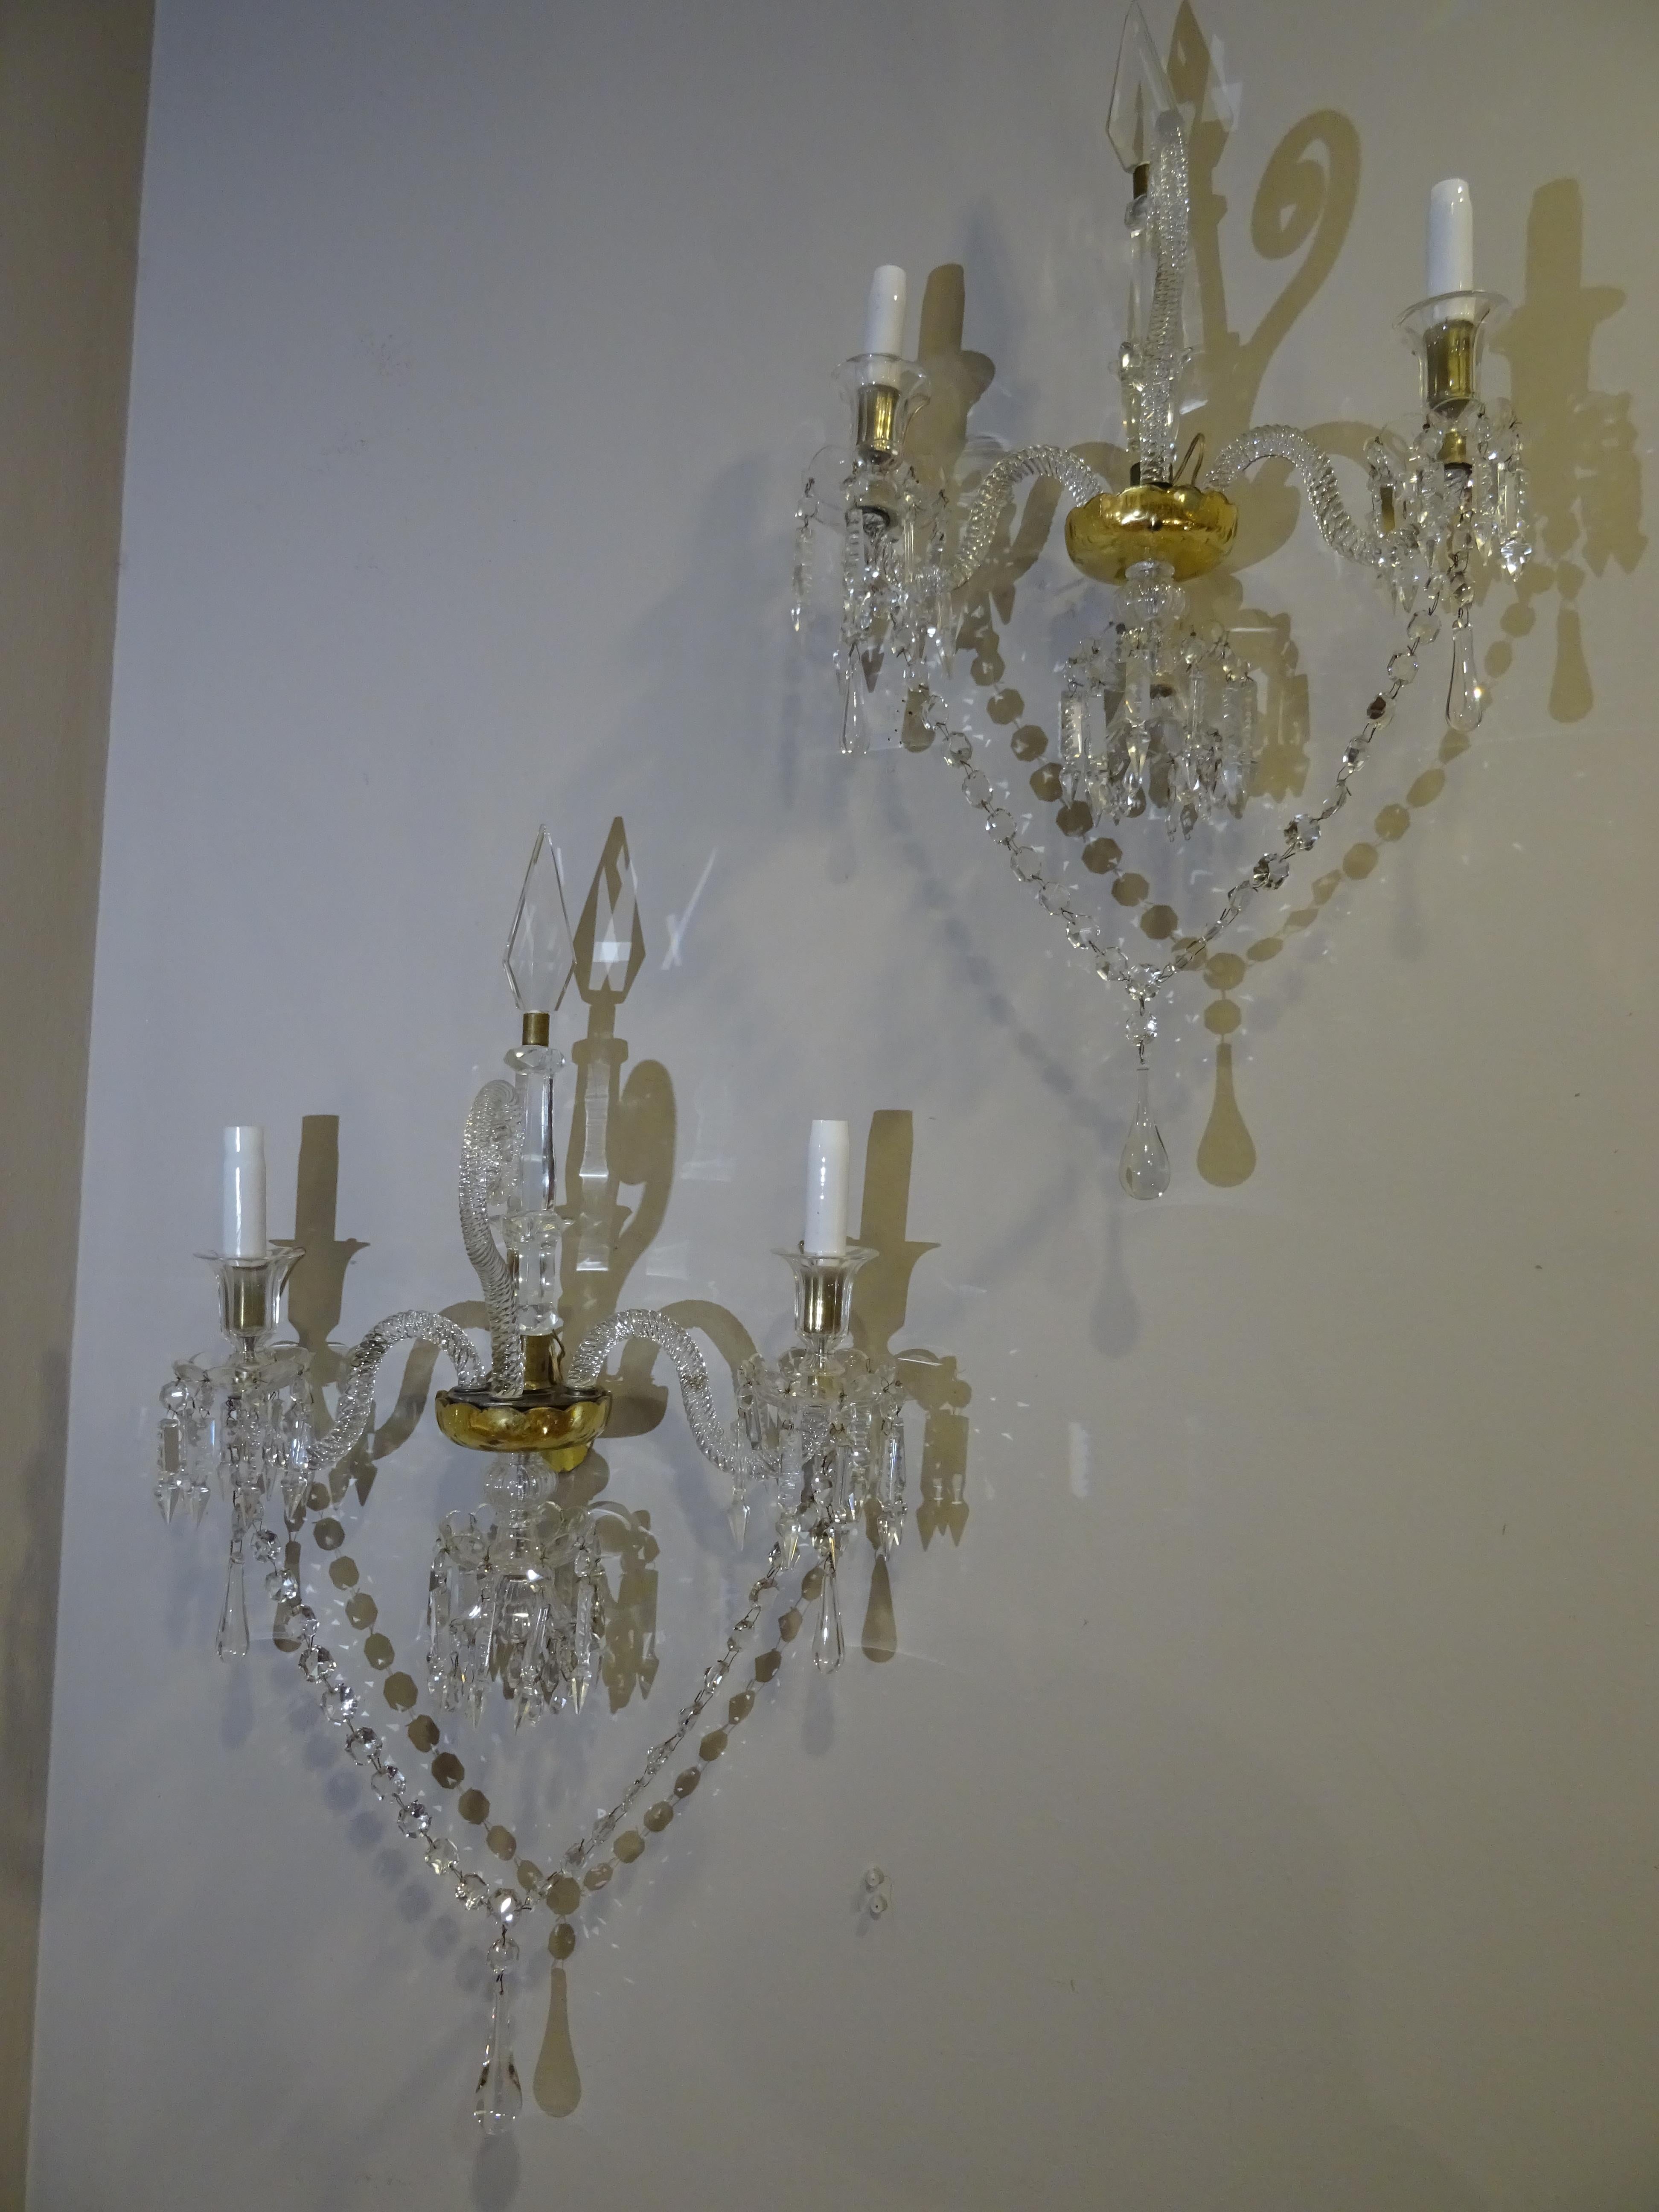 An amazing couple of glass and golden glass Baccarat white glass sconces. In a Luis XV style and Napoleon III period. With 2 arms and a central shaft all in carved crystal at diamond tip. Center of the pieces in gold azogado crystal.
Exquisite